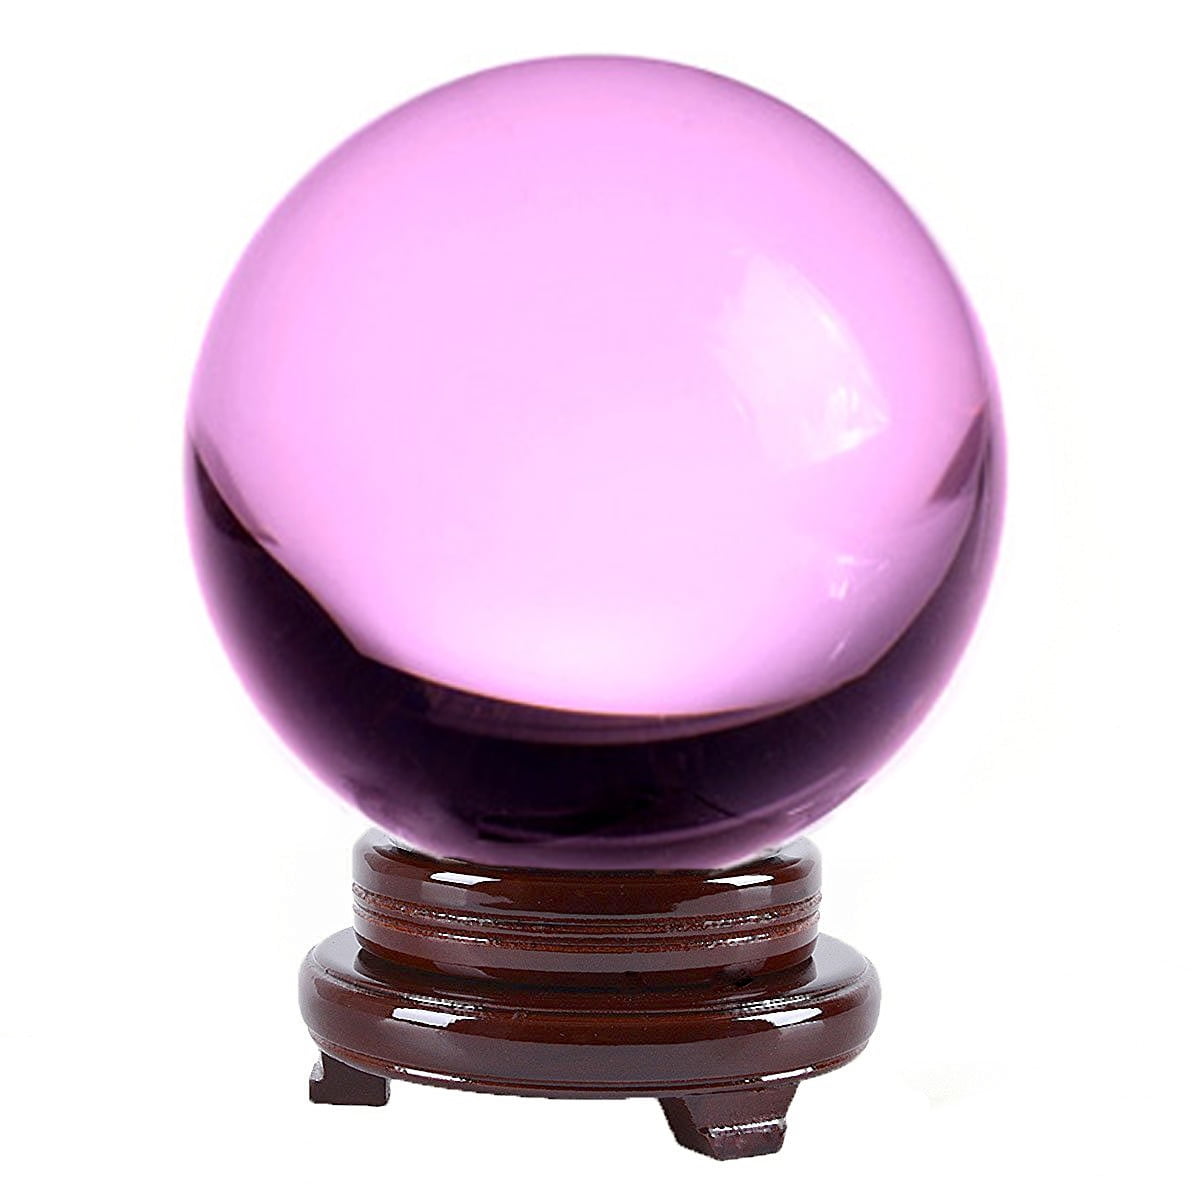 Free Shipping Amlong Crystal Clear Crystal Ball 150mm 6 inch Including Gold.. 